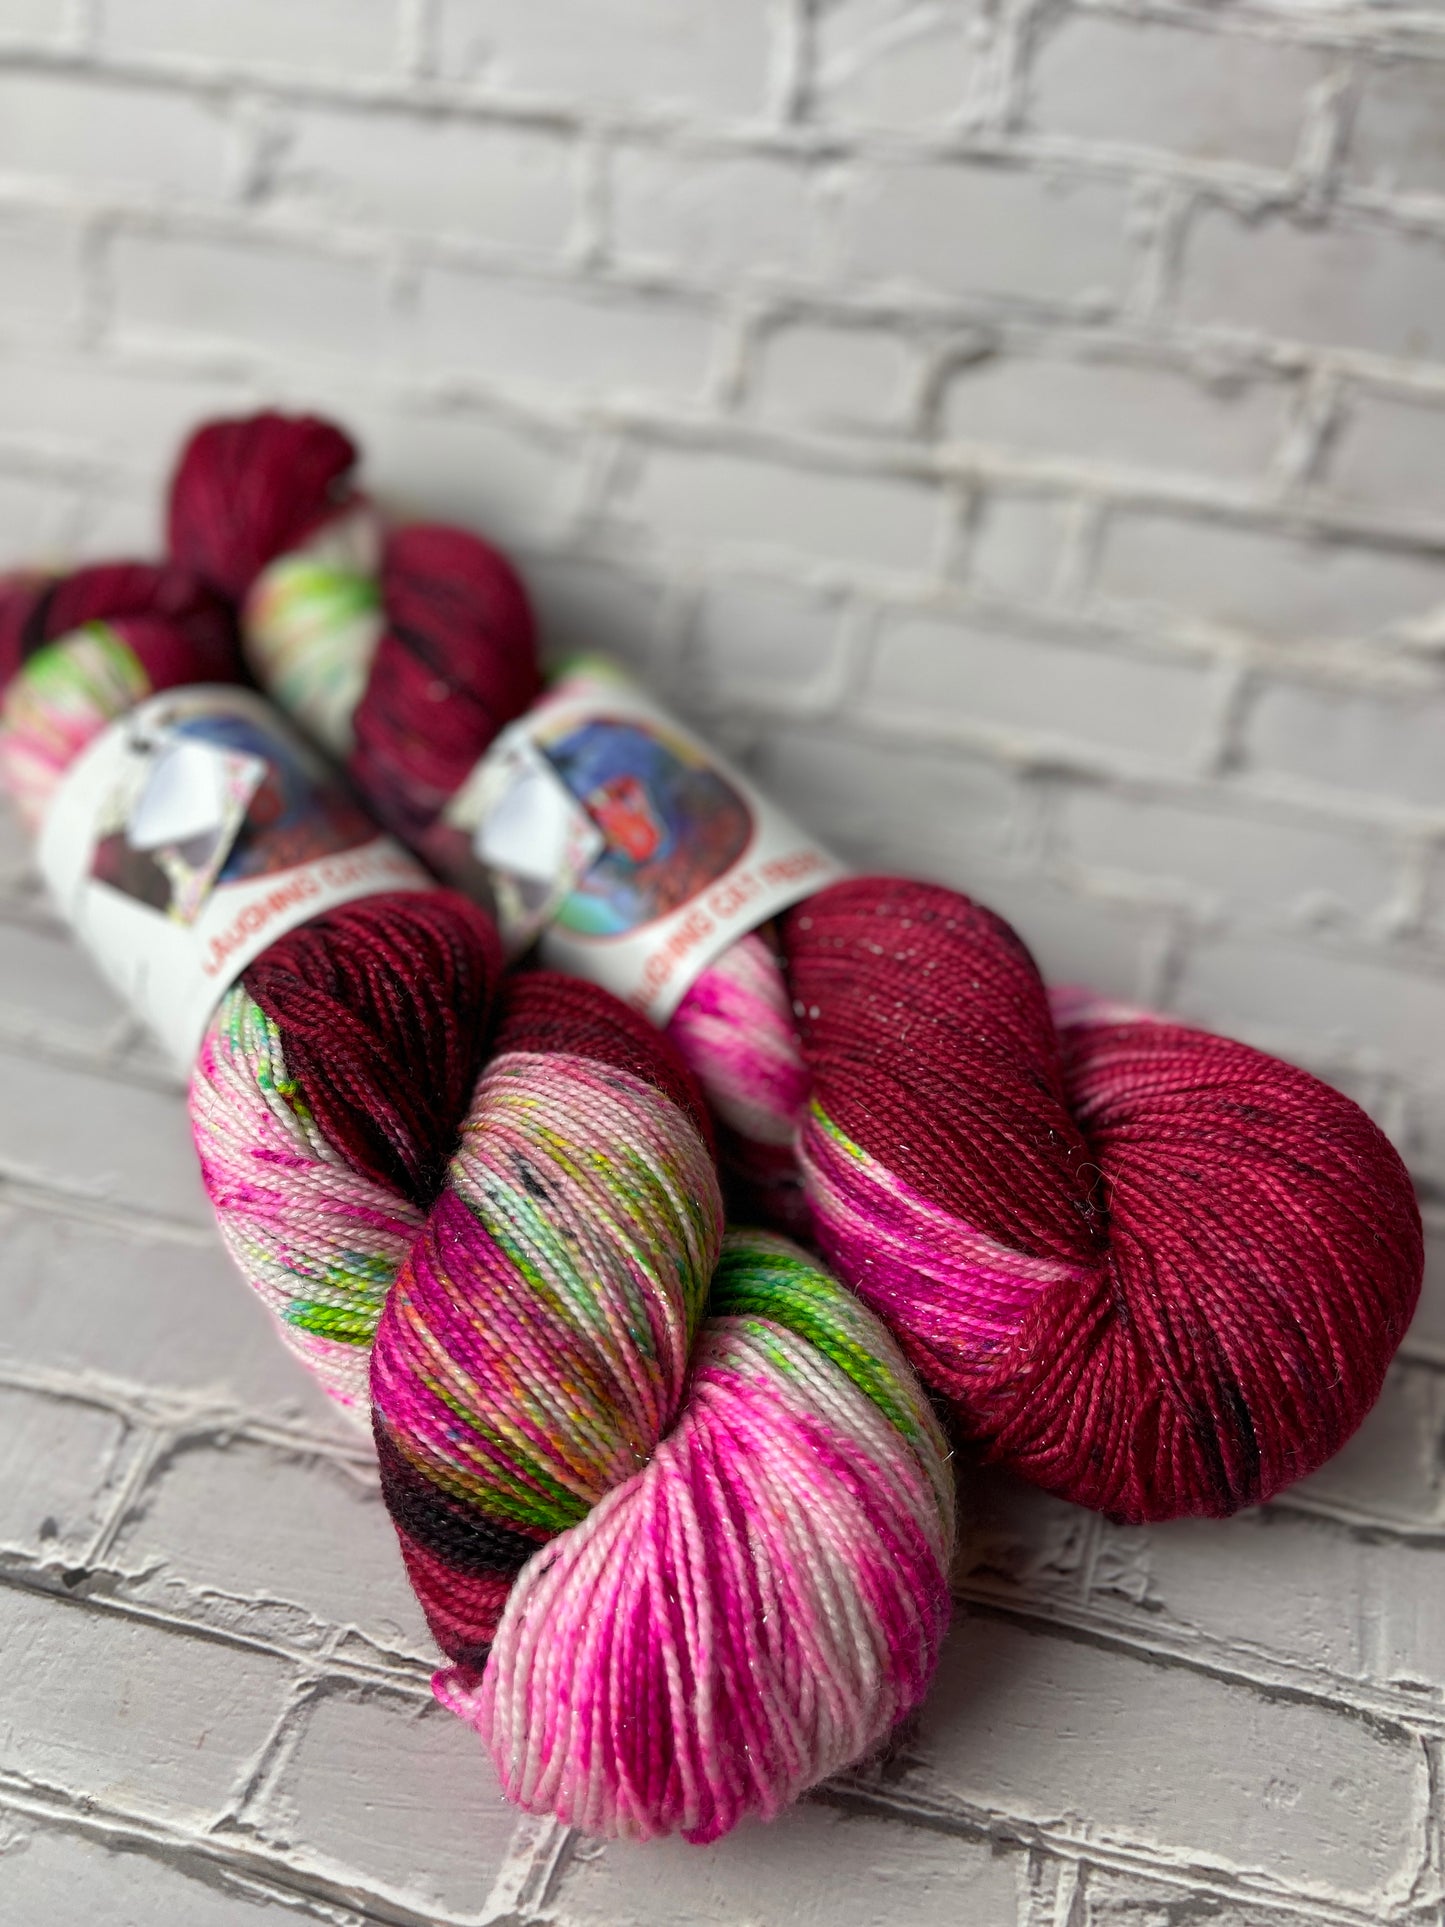 "Offred" on Various Yarn Bases